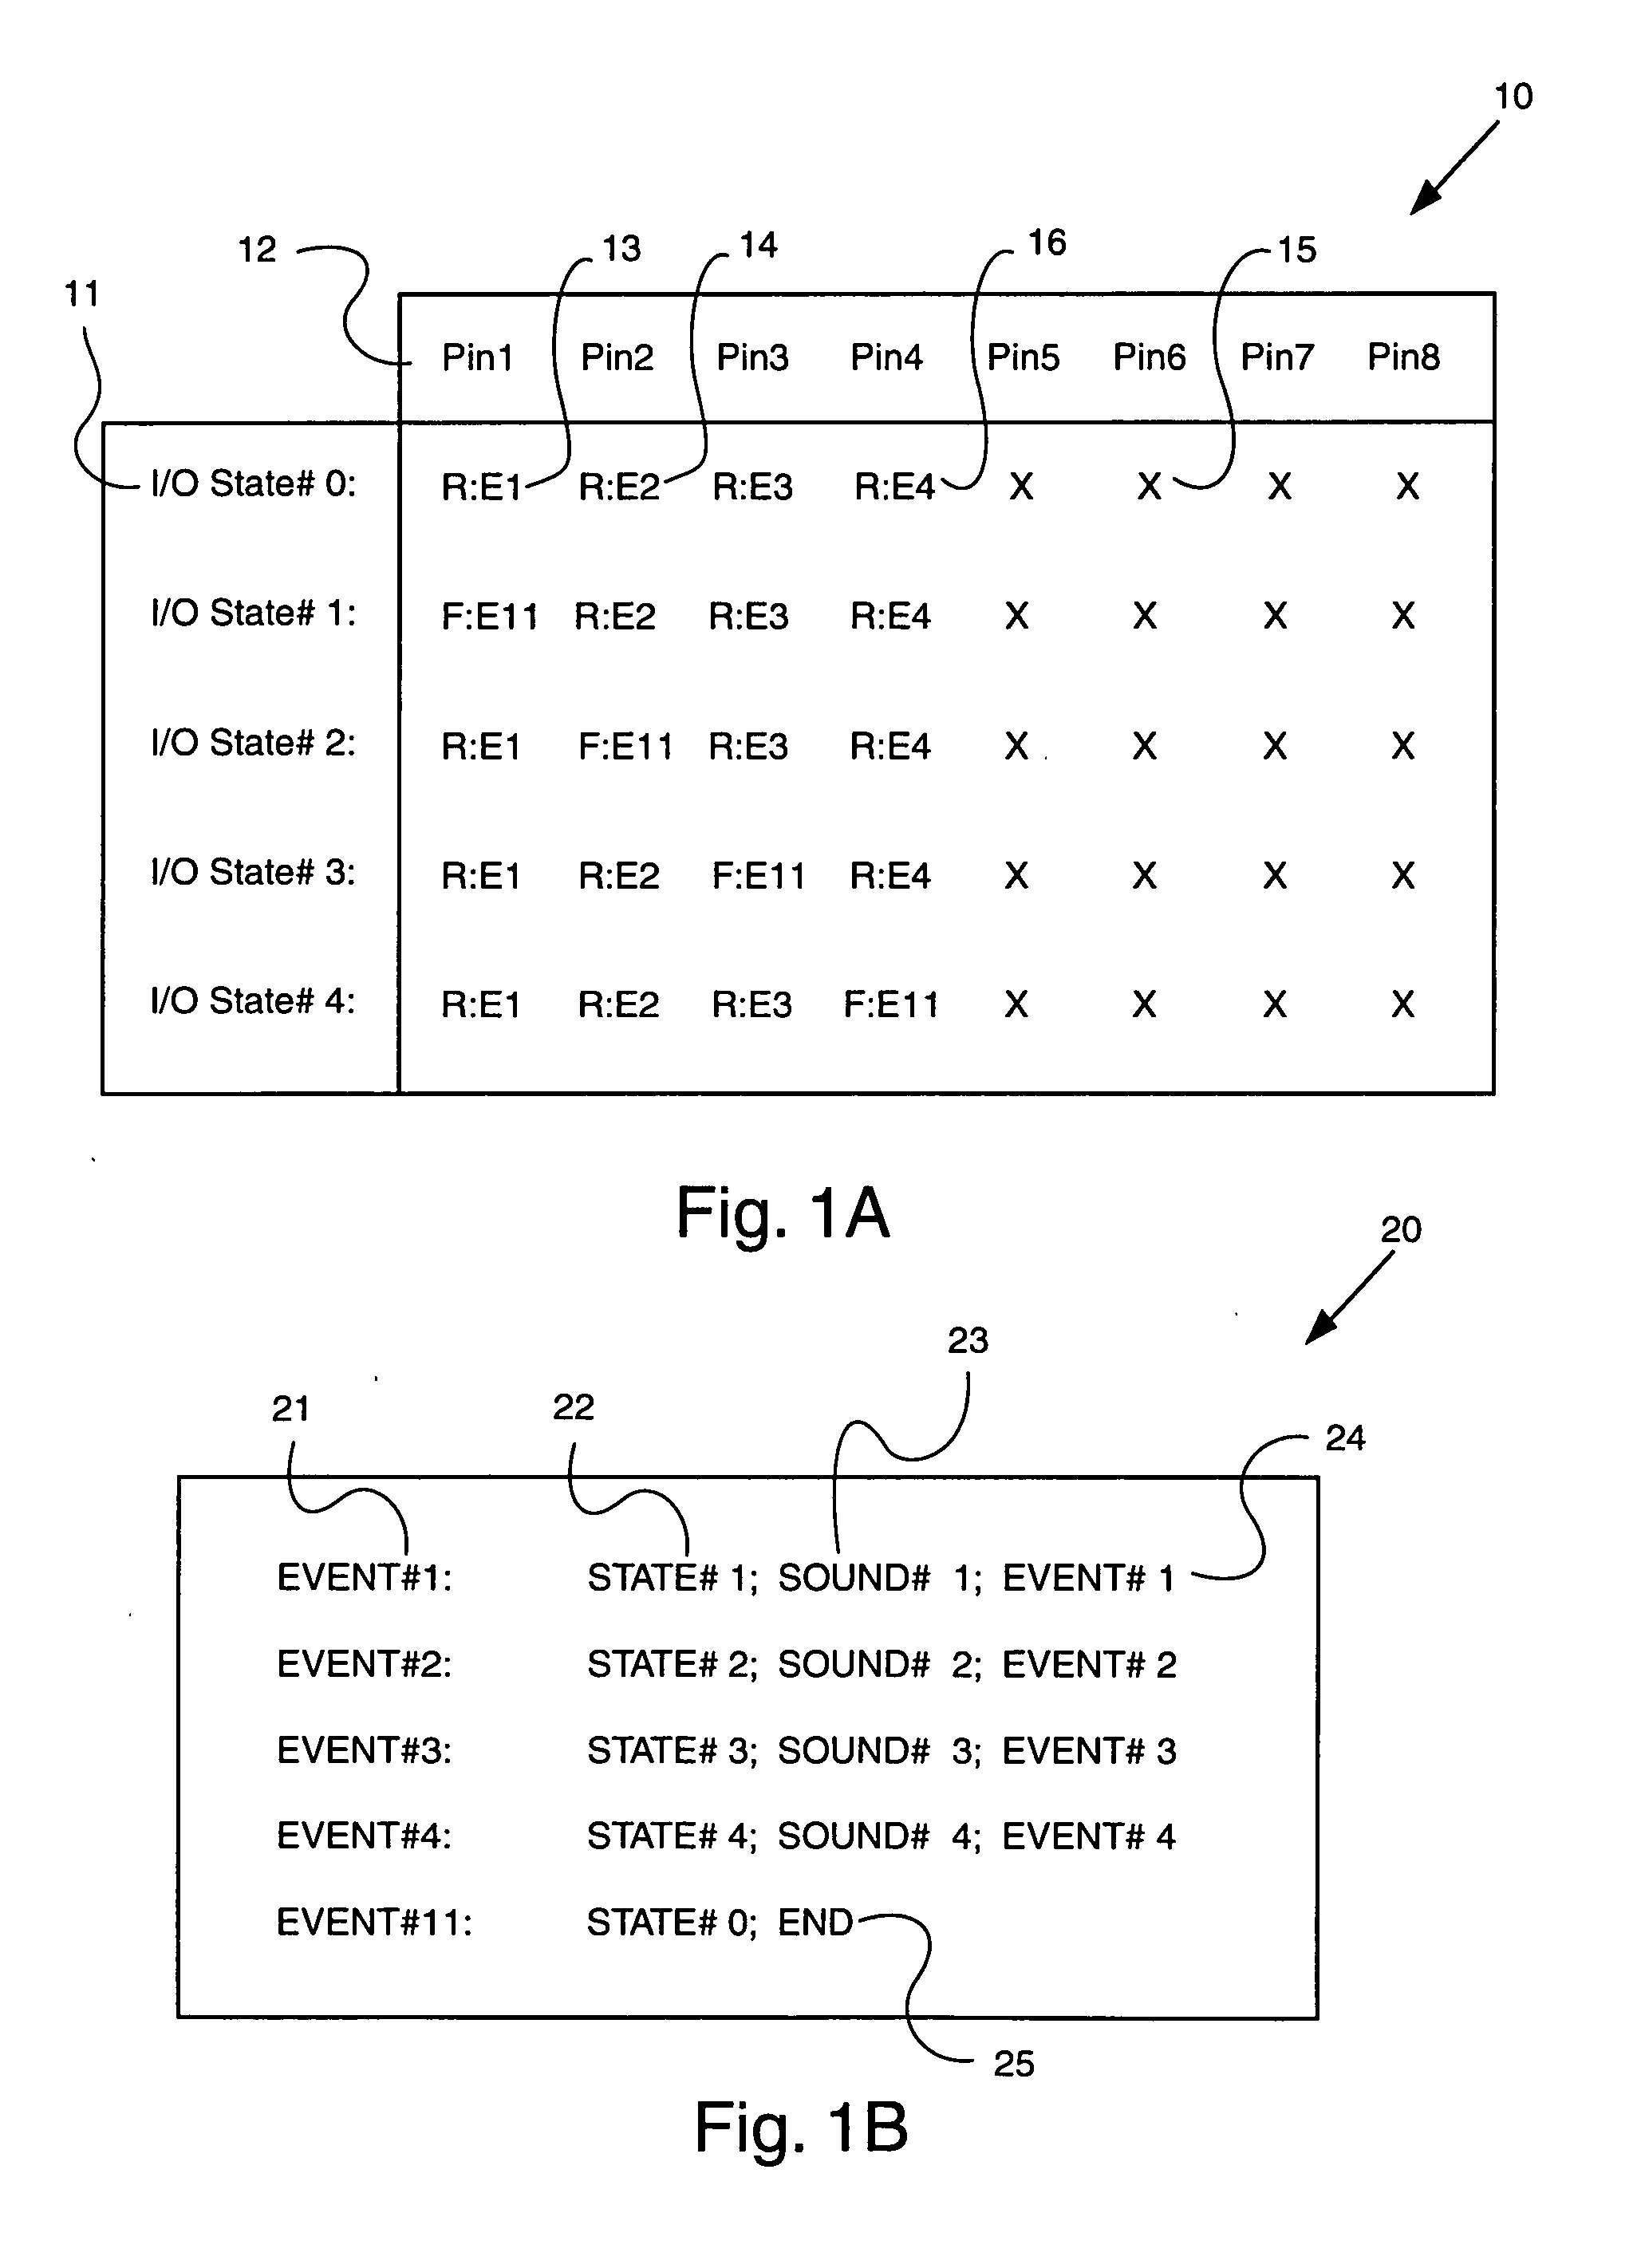 Cloud servicing system configured for servicing smart phone or touch pad circuit applications and consumer programmable articles